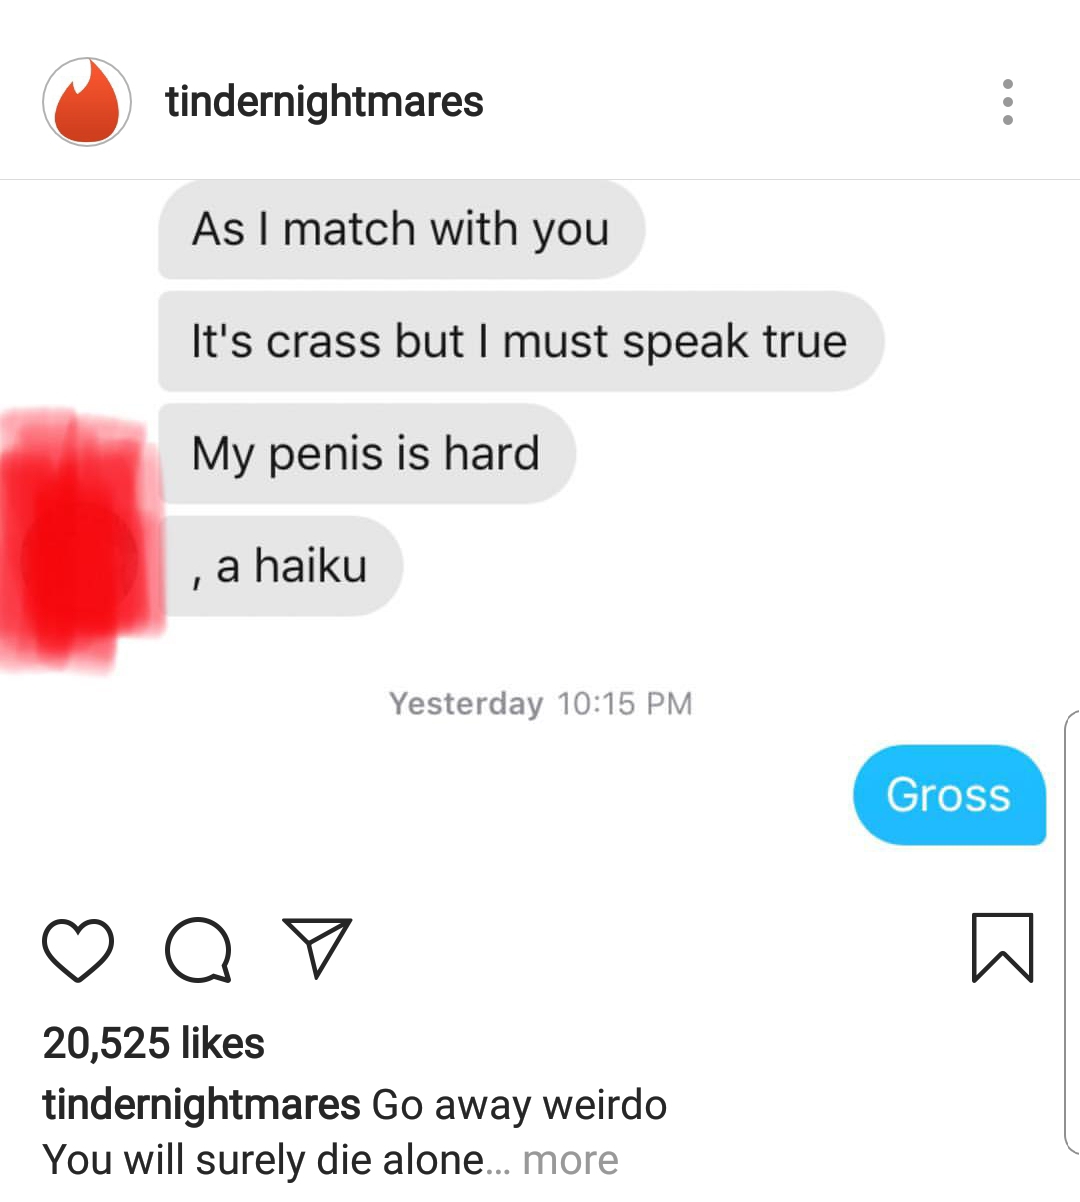 memes - media - tindernightmares As I match with you It's crass but I must speak true My penis is hard , a haiku Yesterday Gross Op 20,525 tindernightmares Go away weirdo You will surely die alone... more